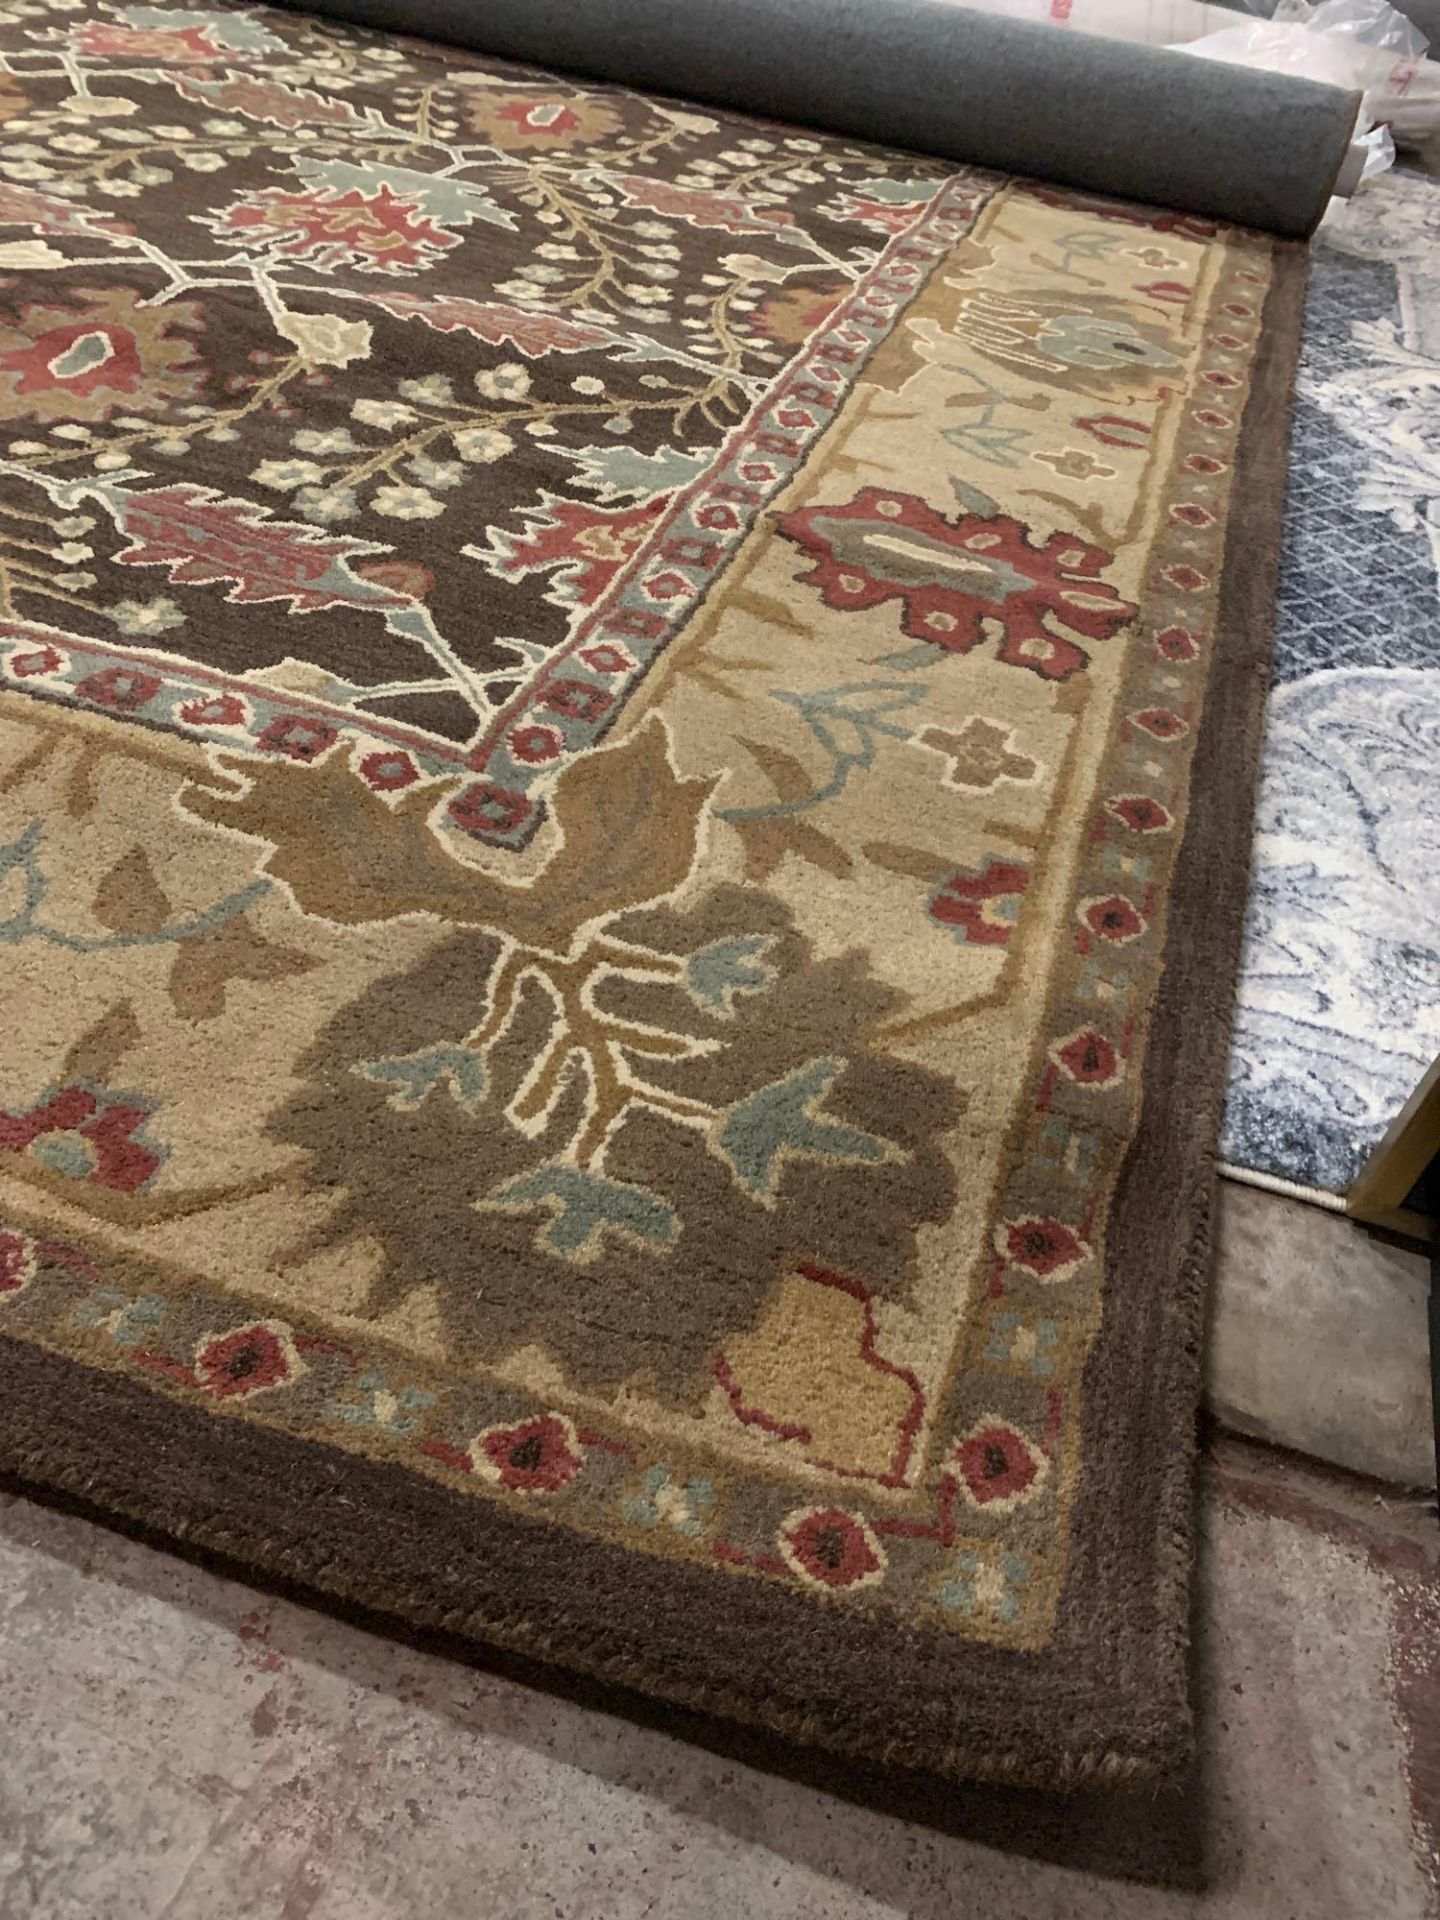 Nain Floral Ziegler Rug Hand Tufted High Quality Wool Made Of 100% Wool Pile Ziegler Rugs Are - Image 4 of 9